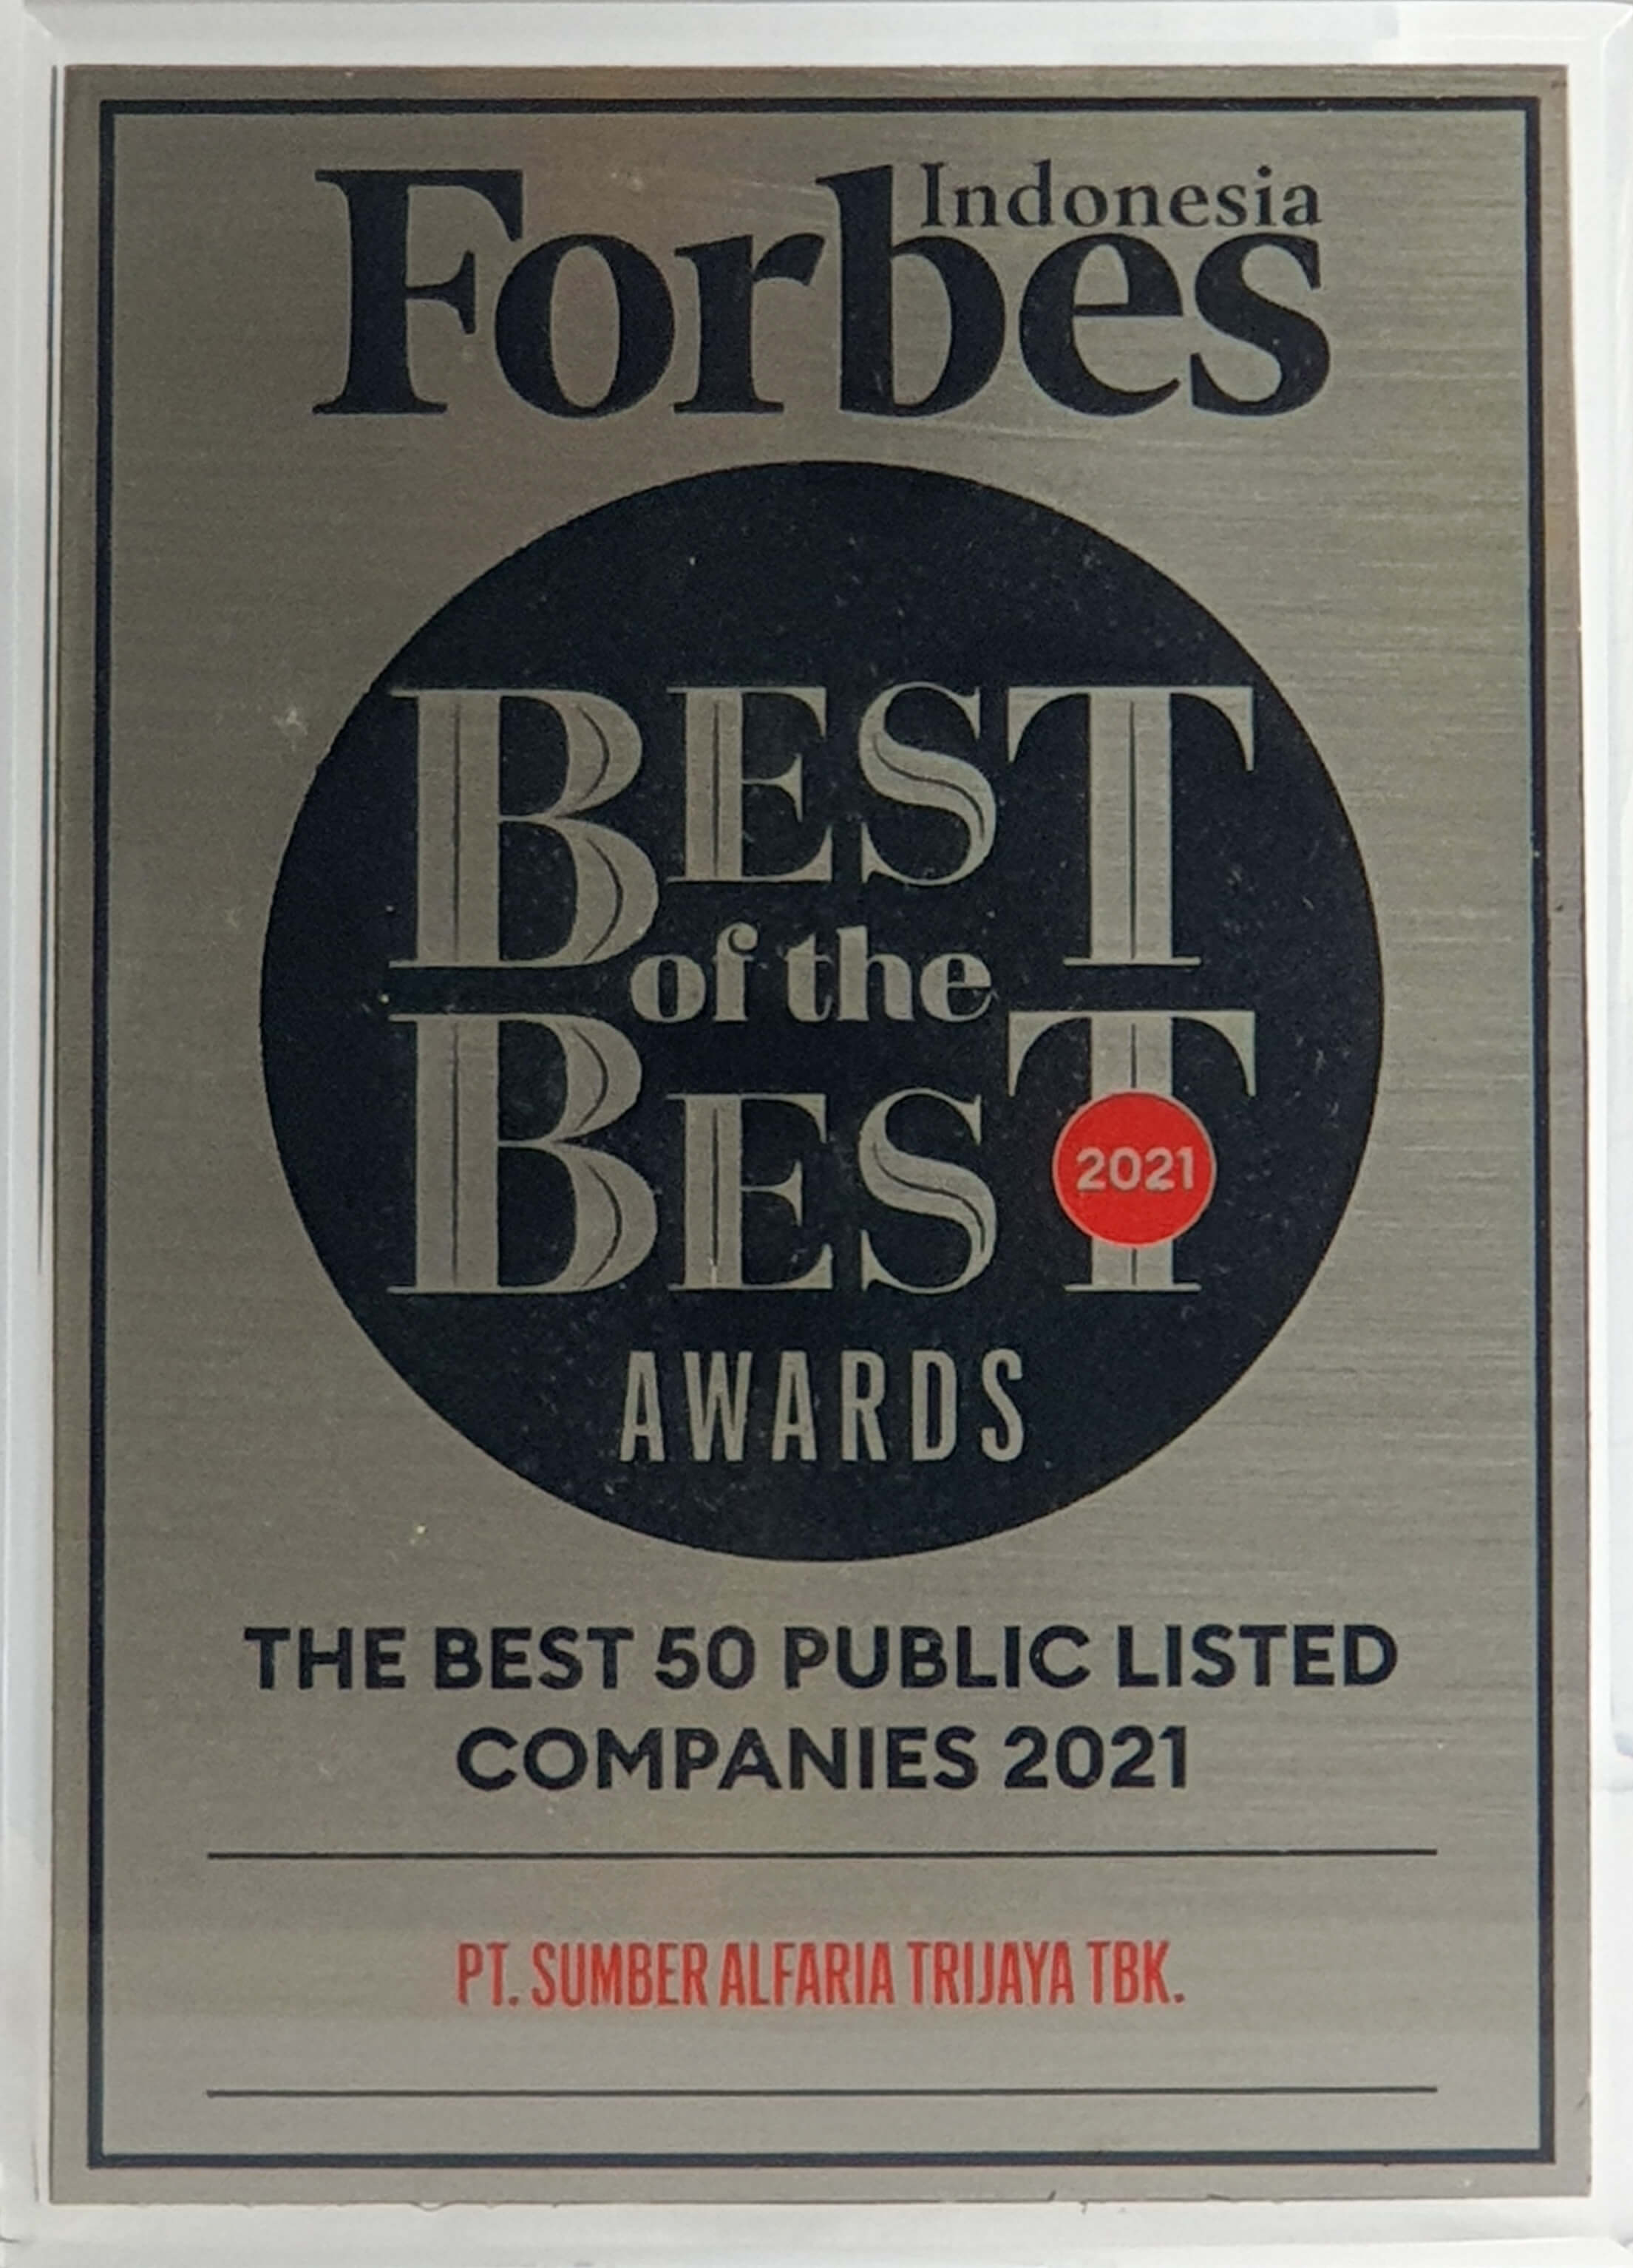 Image reward The Best 50 Public Listed Companies 2021 dari Forbes Indonesia